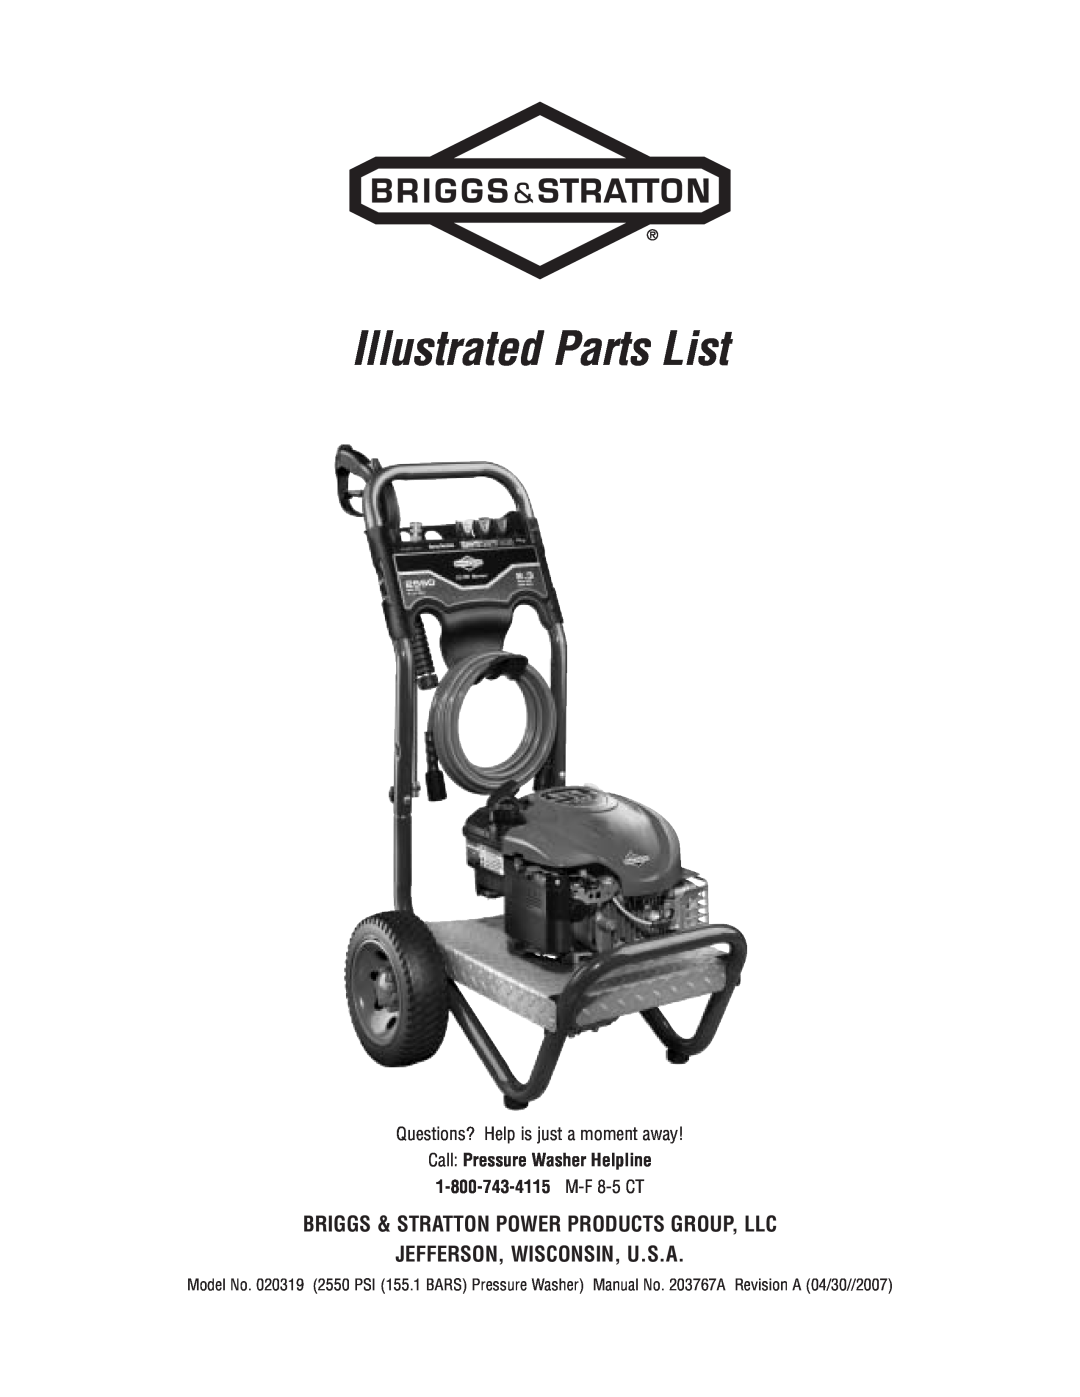 Briggs & Stratton 20319 manual Illustrated Parts List, Briggs & Stratton Power Products Group, Llc 